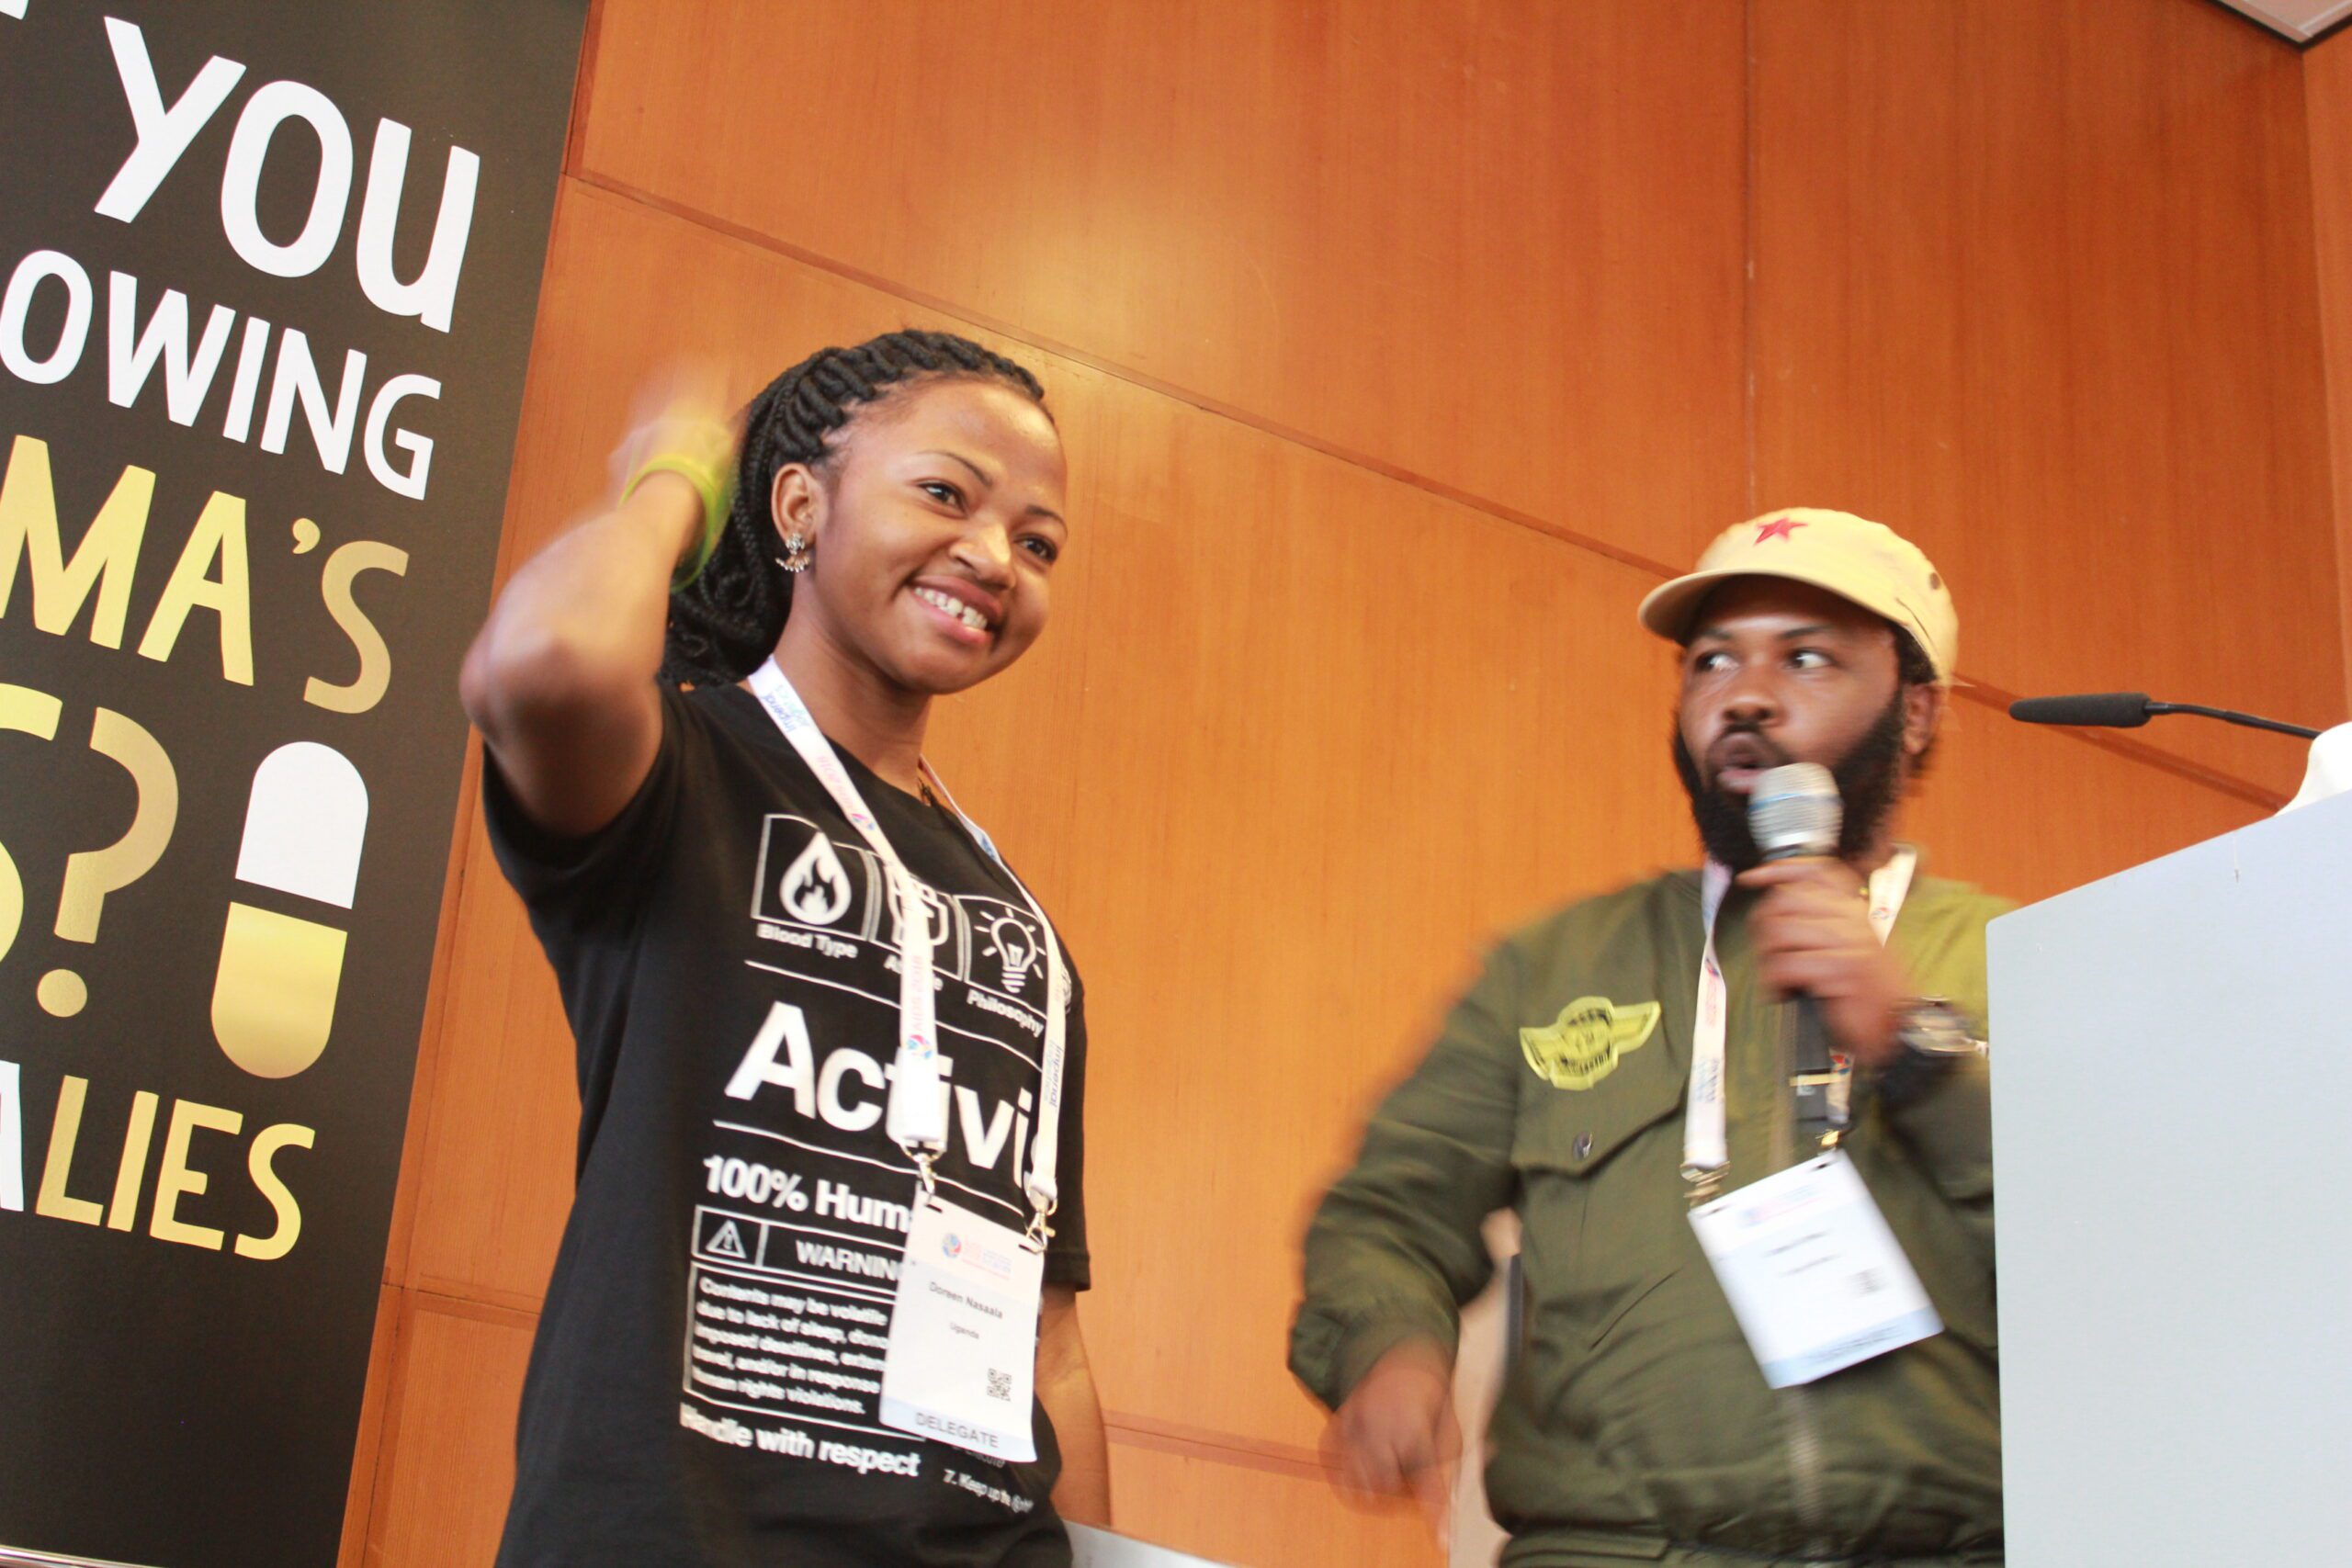 3 Takeaways from the Community Activist Summit